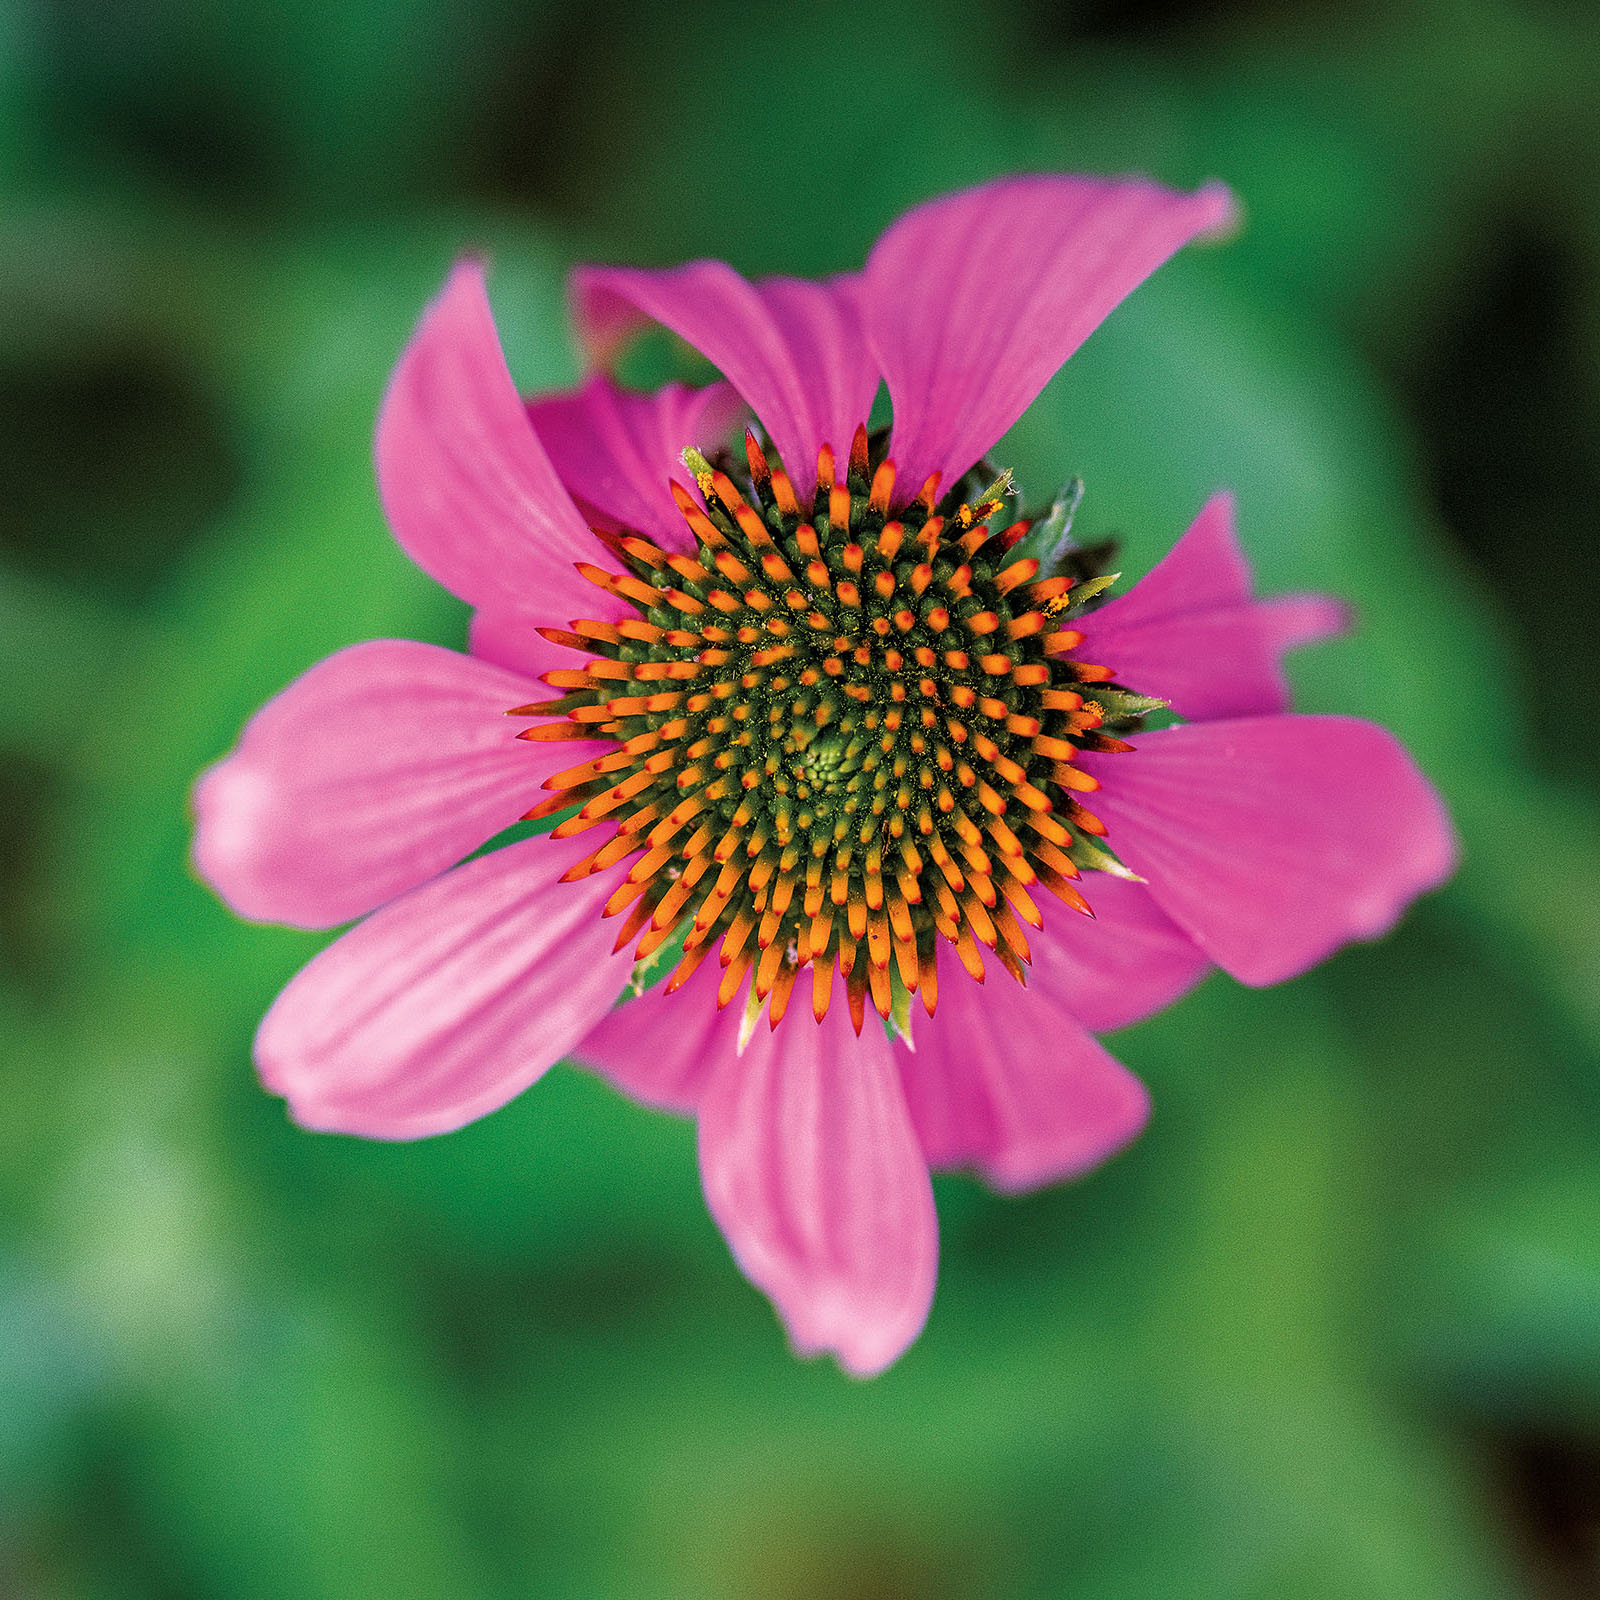 A bright pink flower with an orange spotted center on a green background